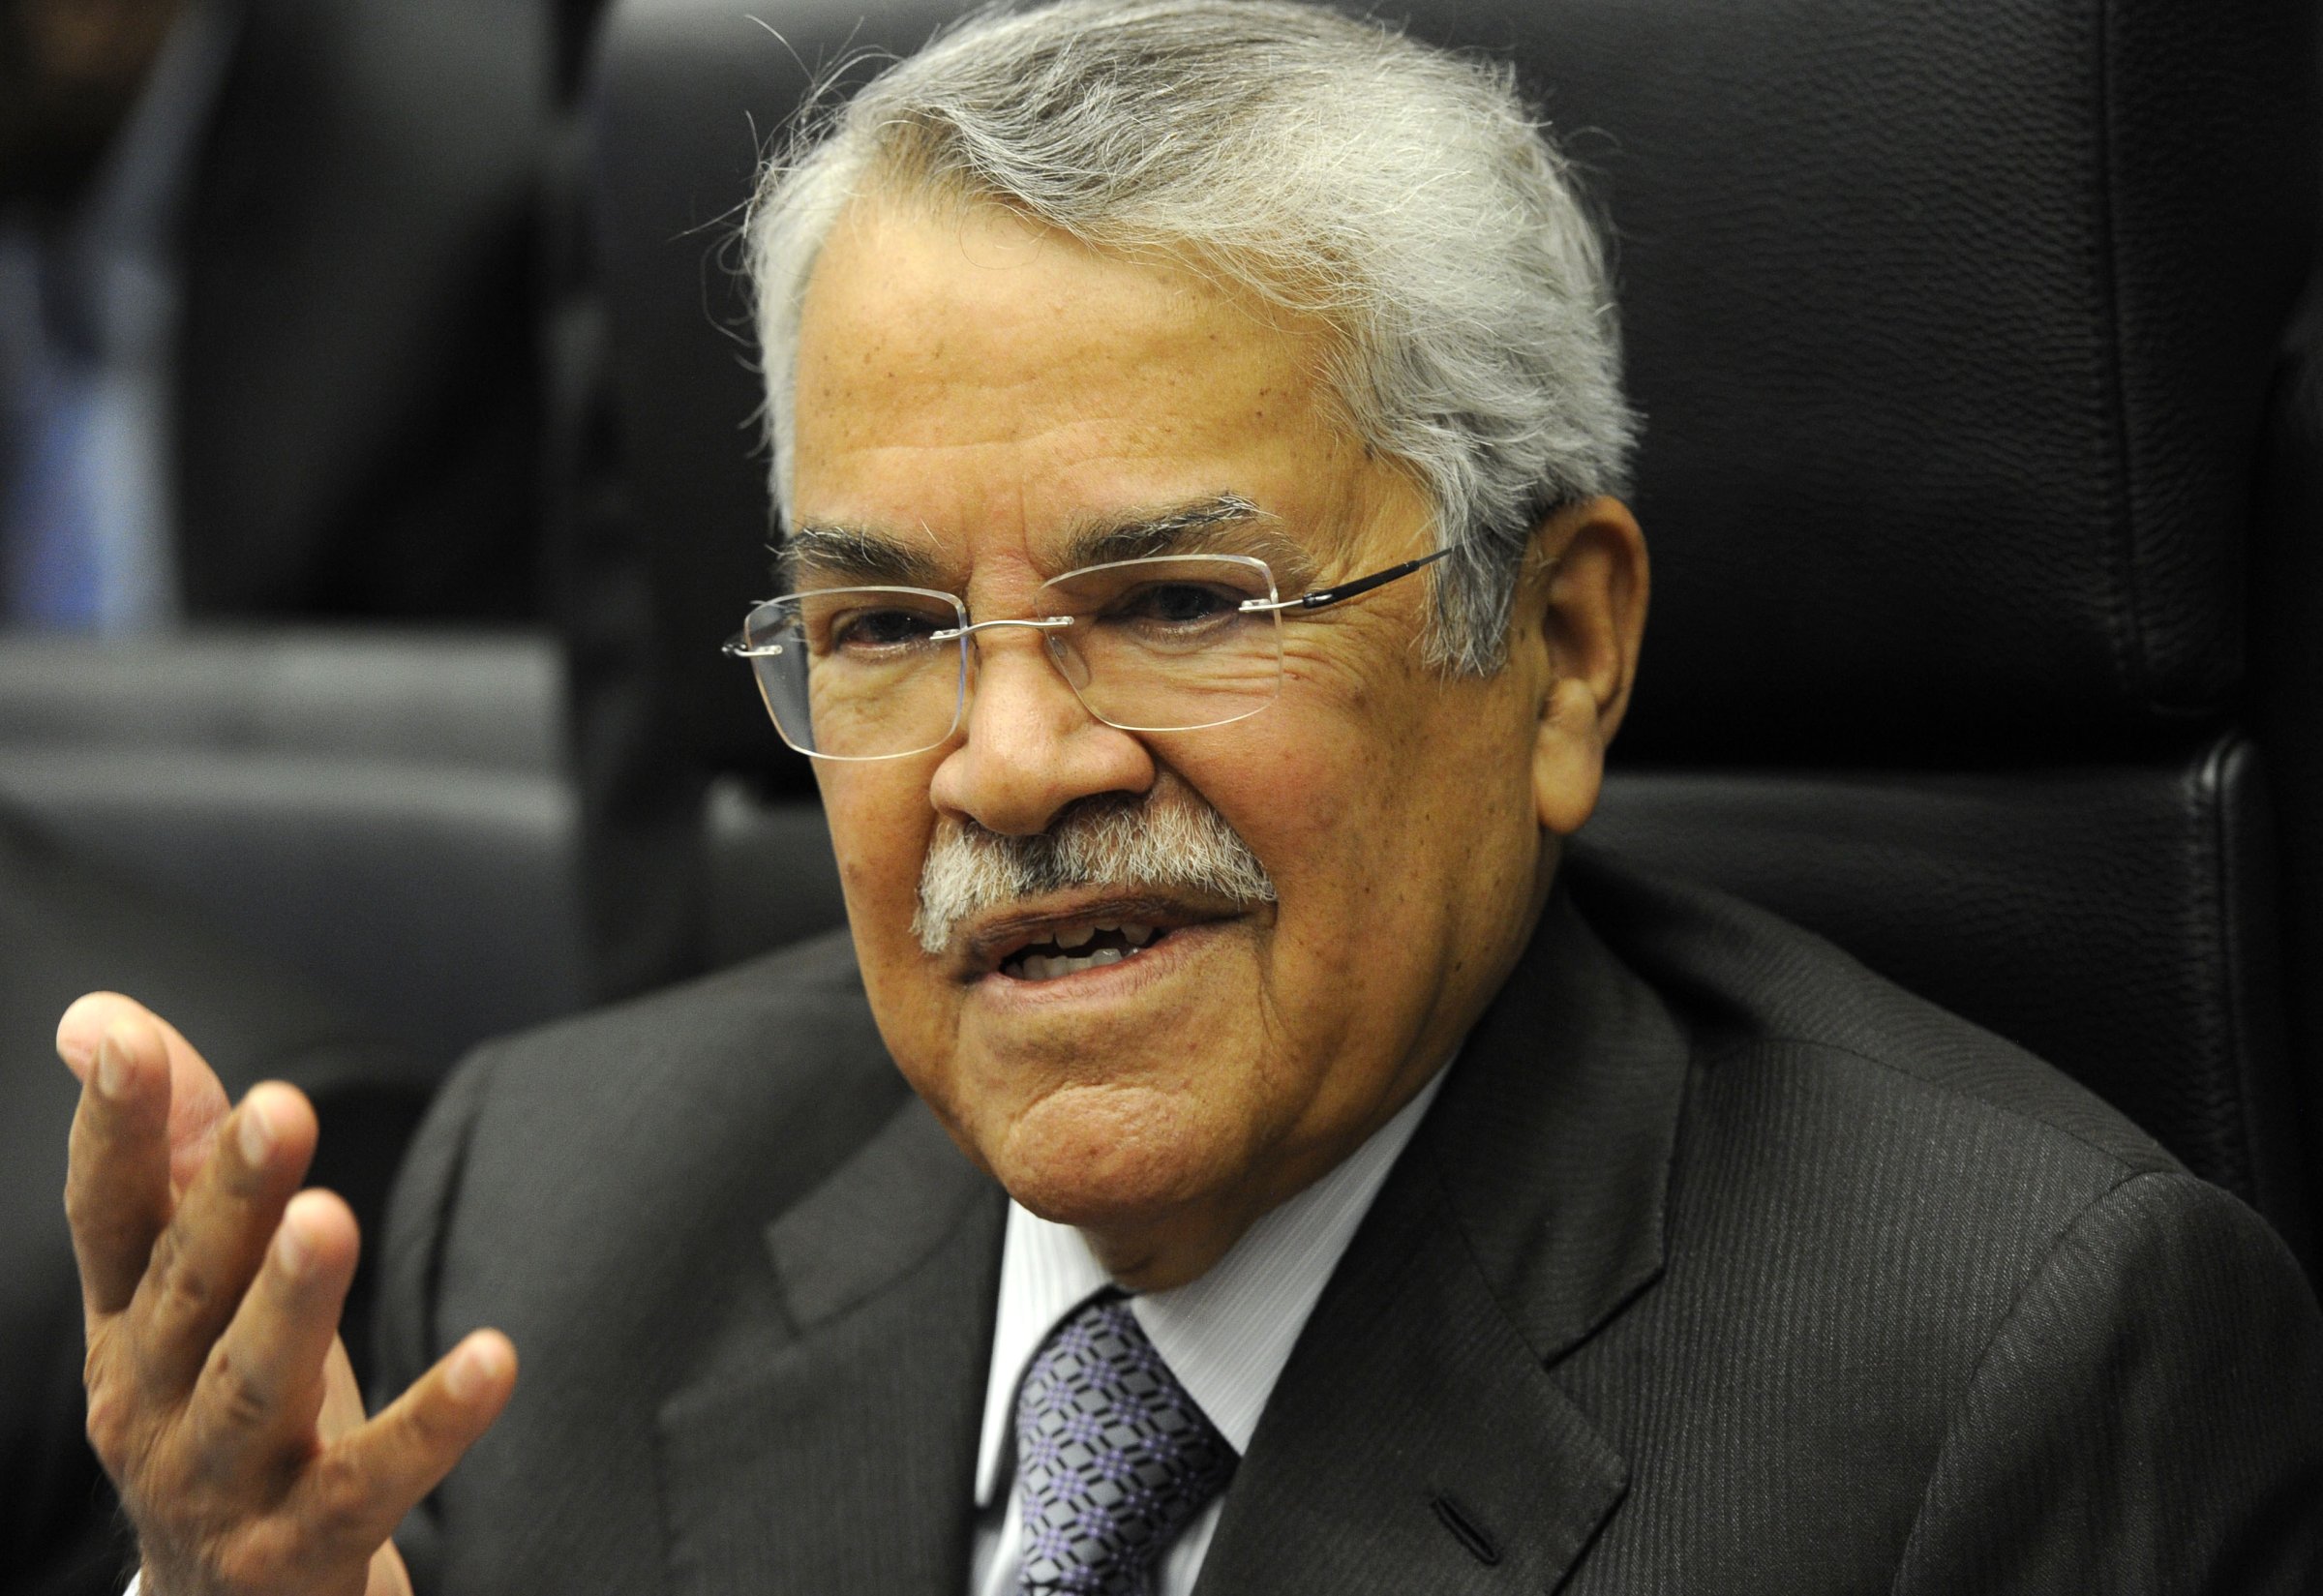 Saudi Oil Minister Ali al-Naimi speaks to journalists ahead of the 166th ordinary meeting of the Organization of the Petroleum Exporting Countries (OPEC) in Vienna, Austria on Nov. 27, 2014.